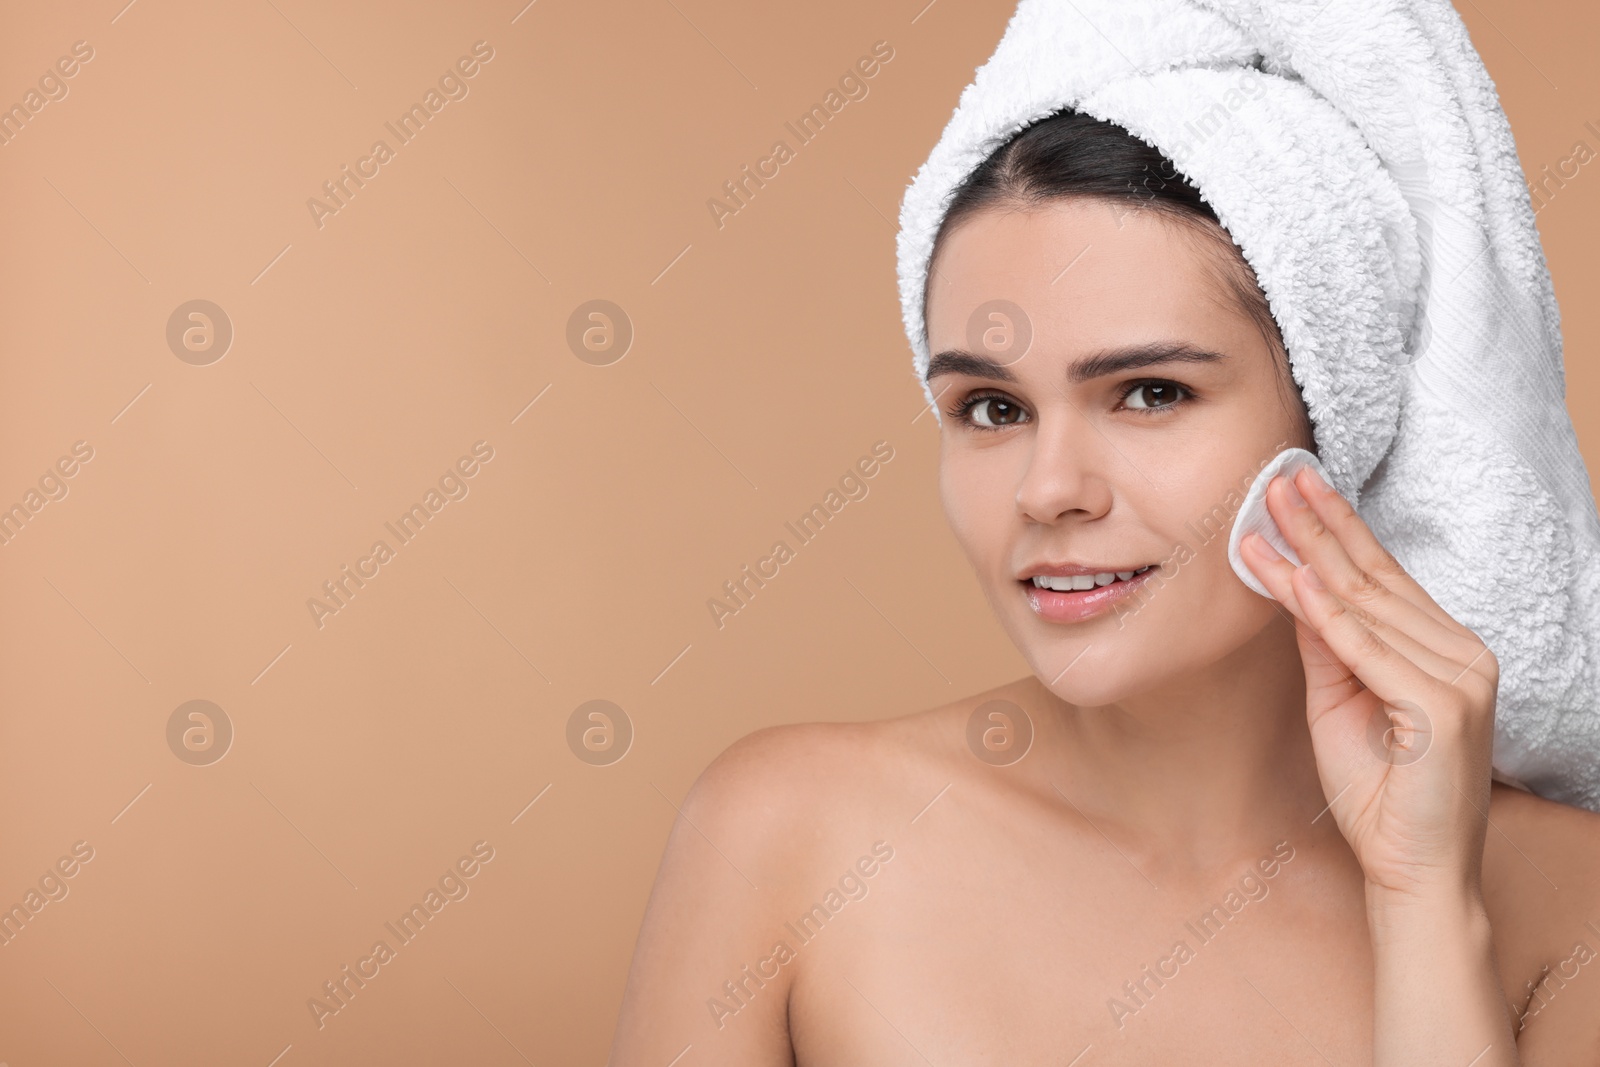 Photo of Young woman cleaning her face with cotton pad on beige background. Space for text